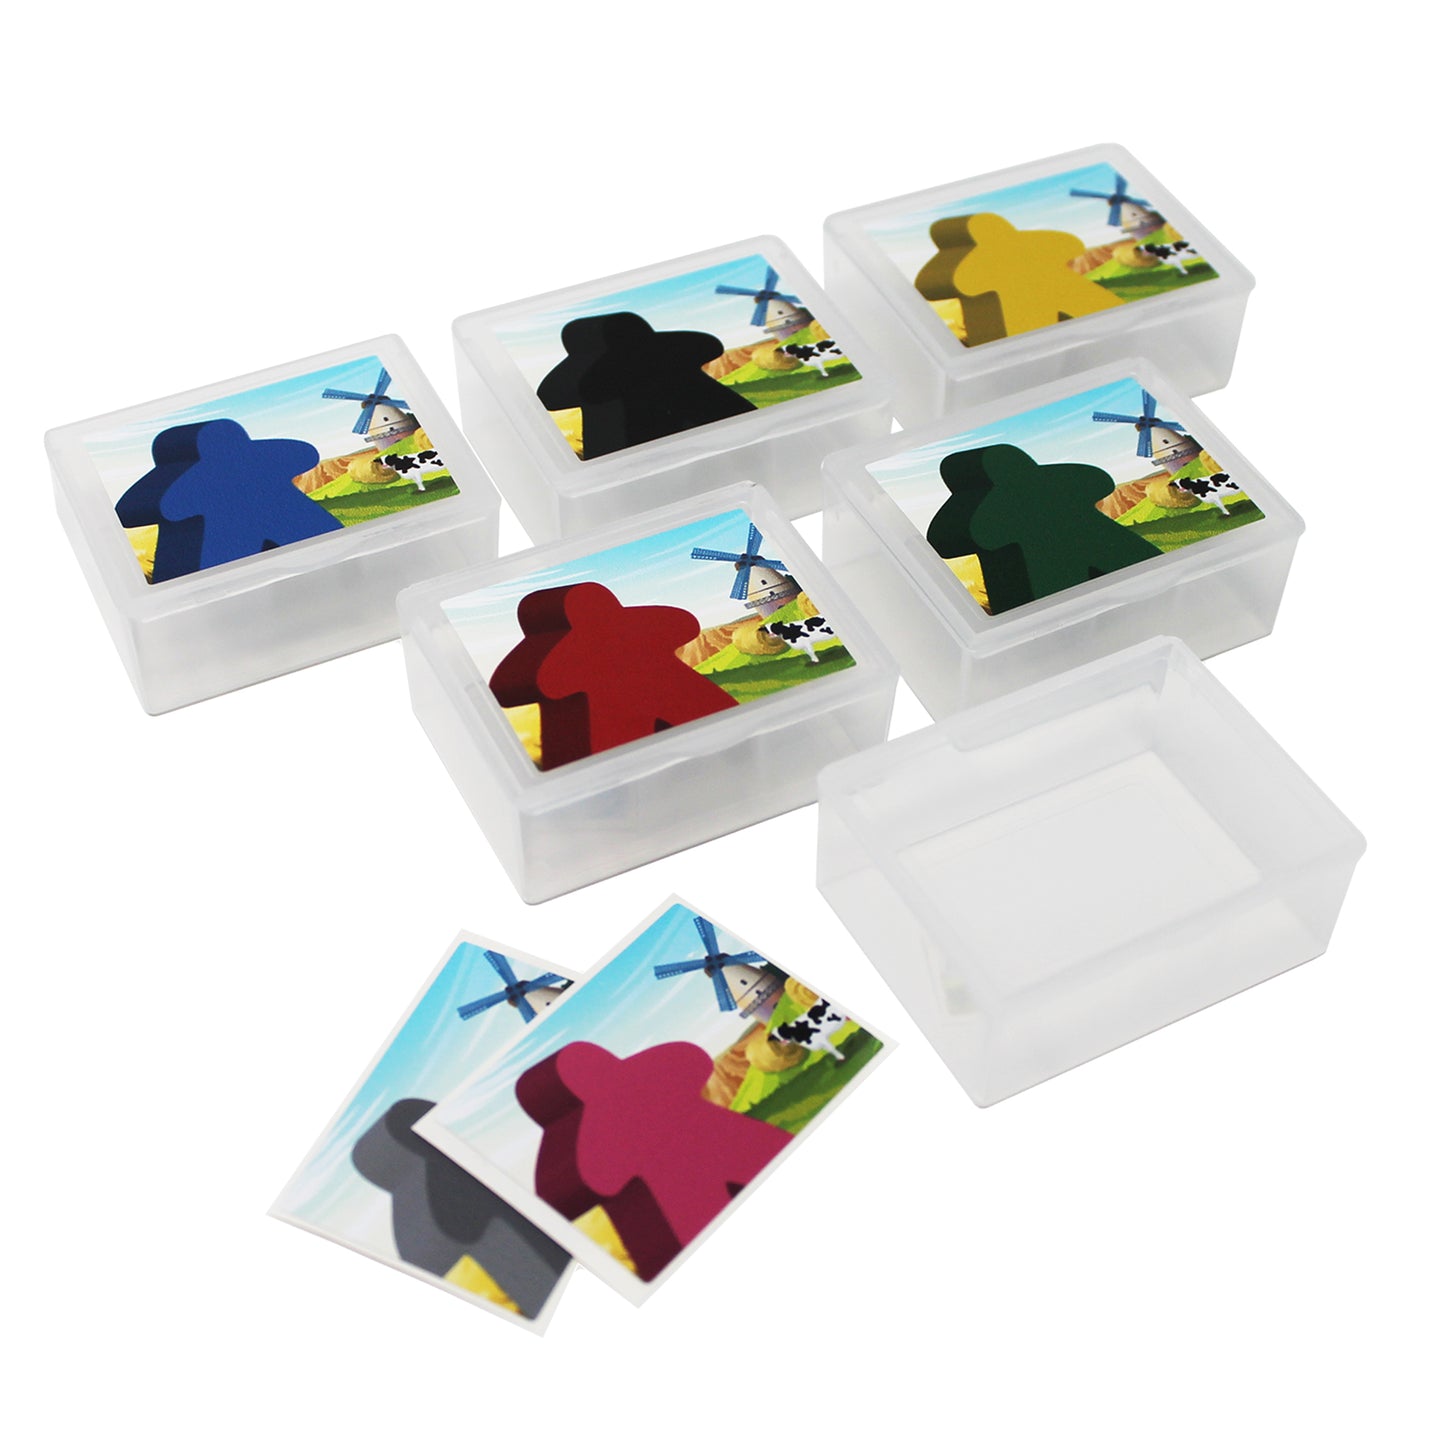 Meeple Storage Containers for Carcassonne, 6 Empty Bins to Organize and Separate Your Game Pieces